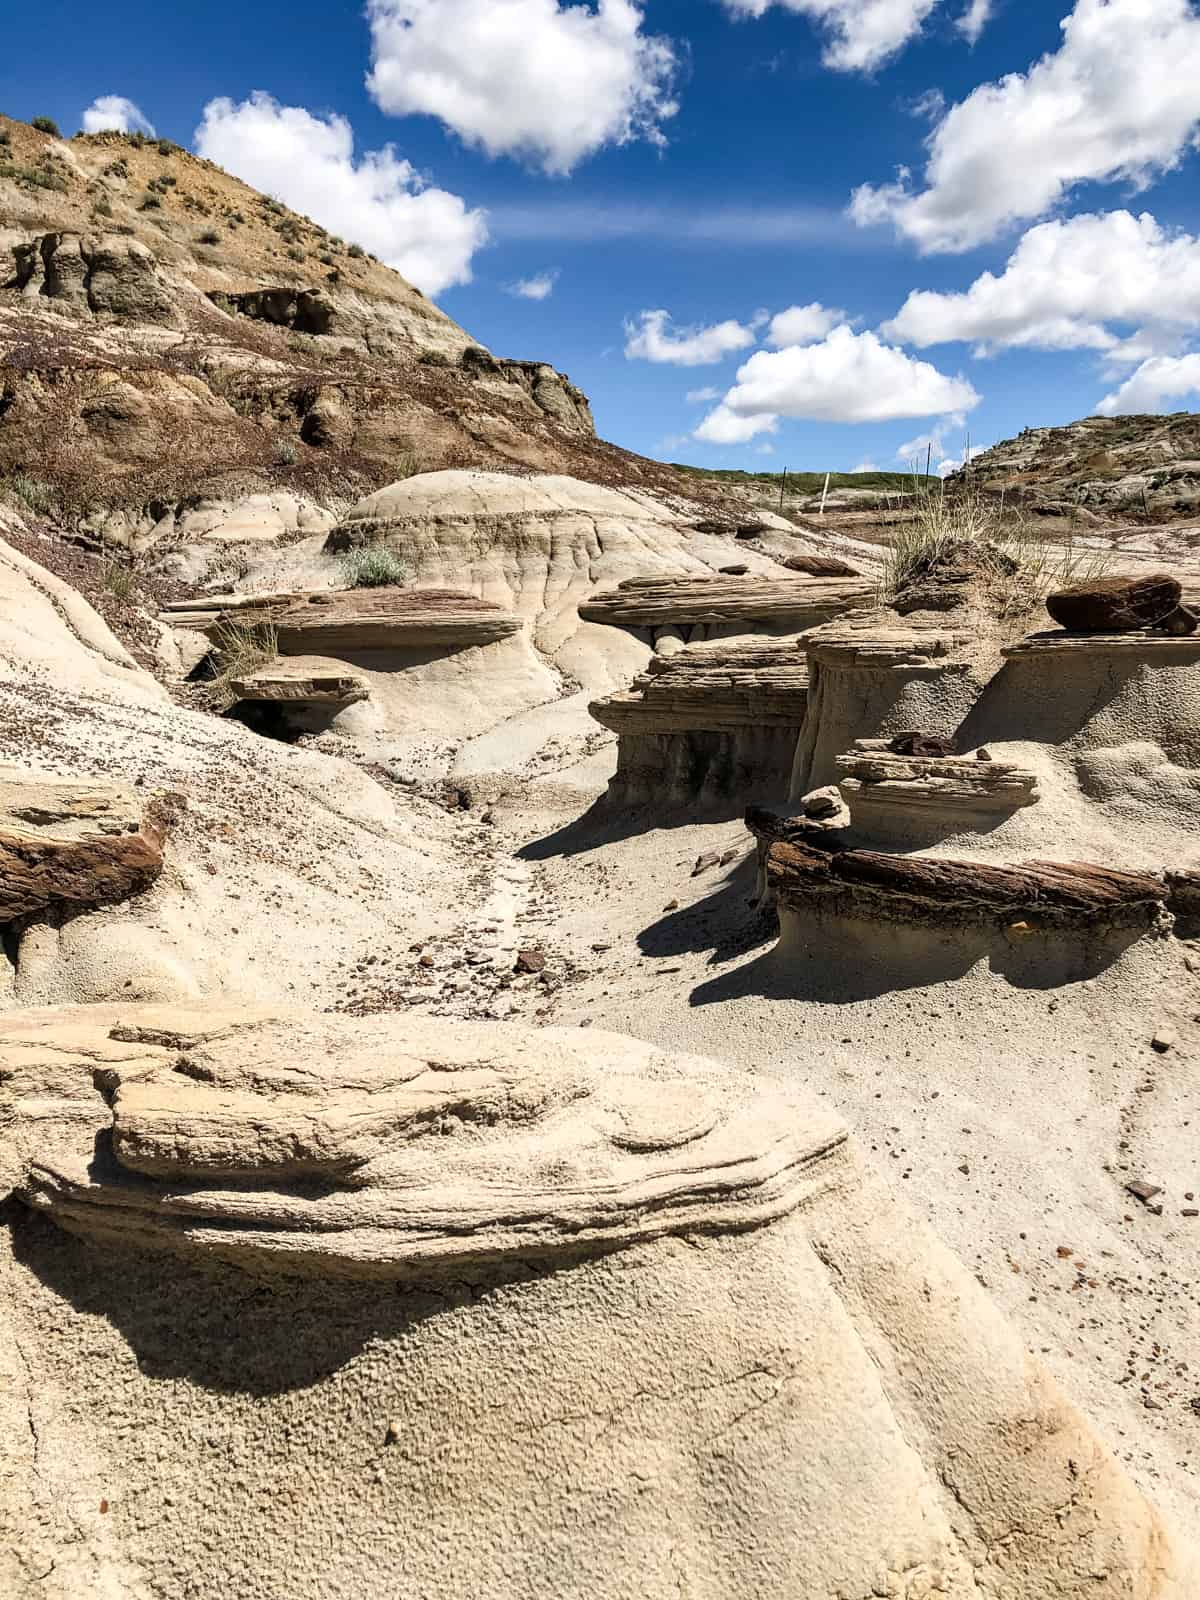 hoodoos on the Dinosaur Trail set against a blue sky and white clouds